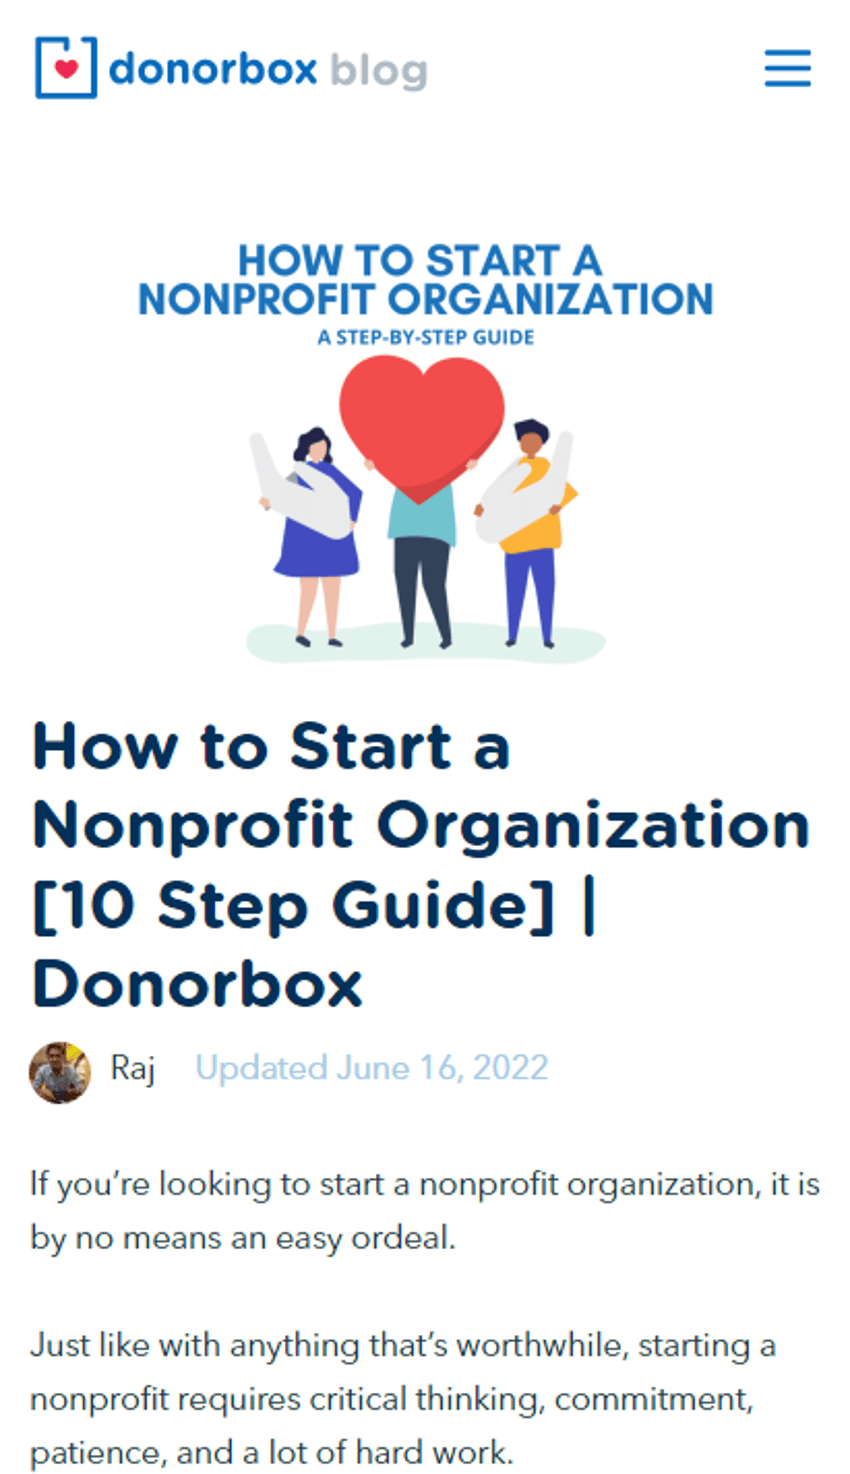 check out the full post [here](https://donorbox.org/nonprofit-blog/start-a-nonprofit)